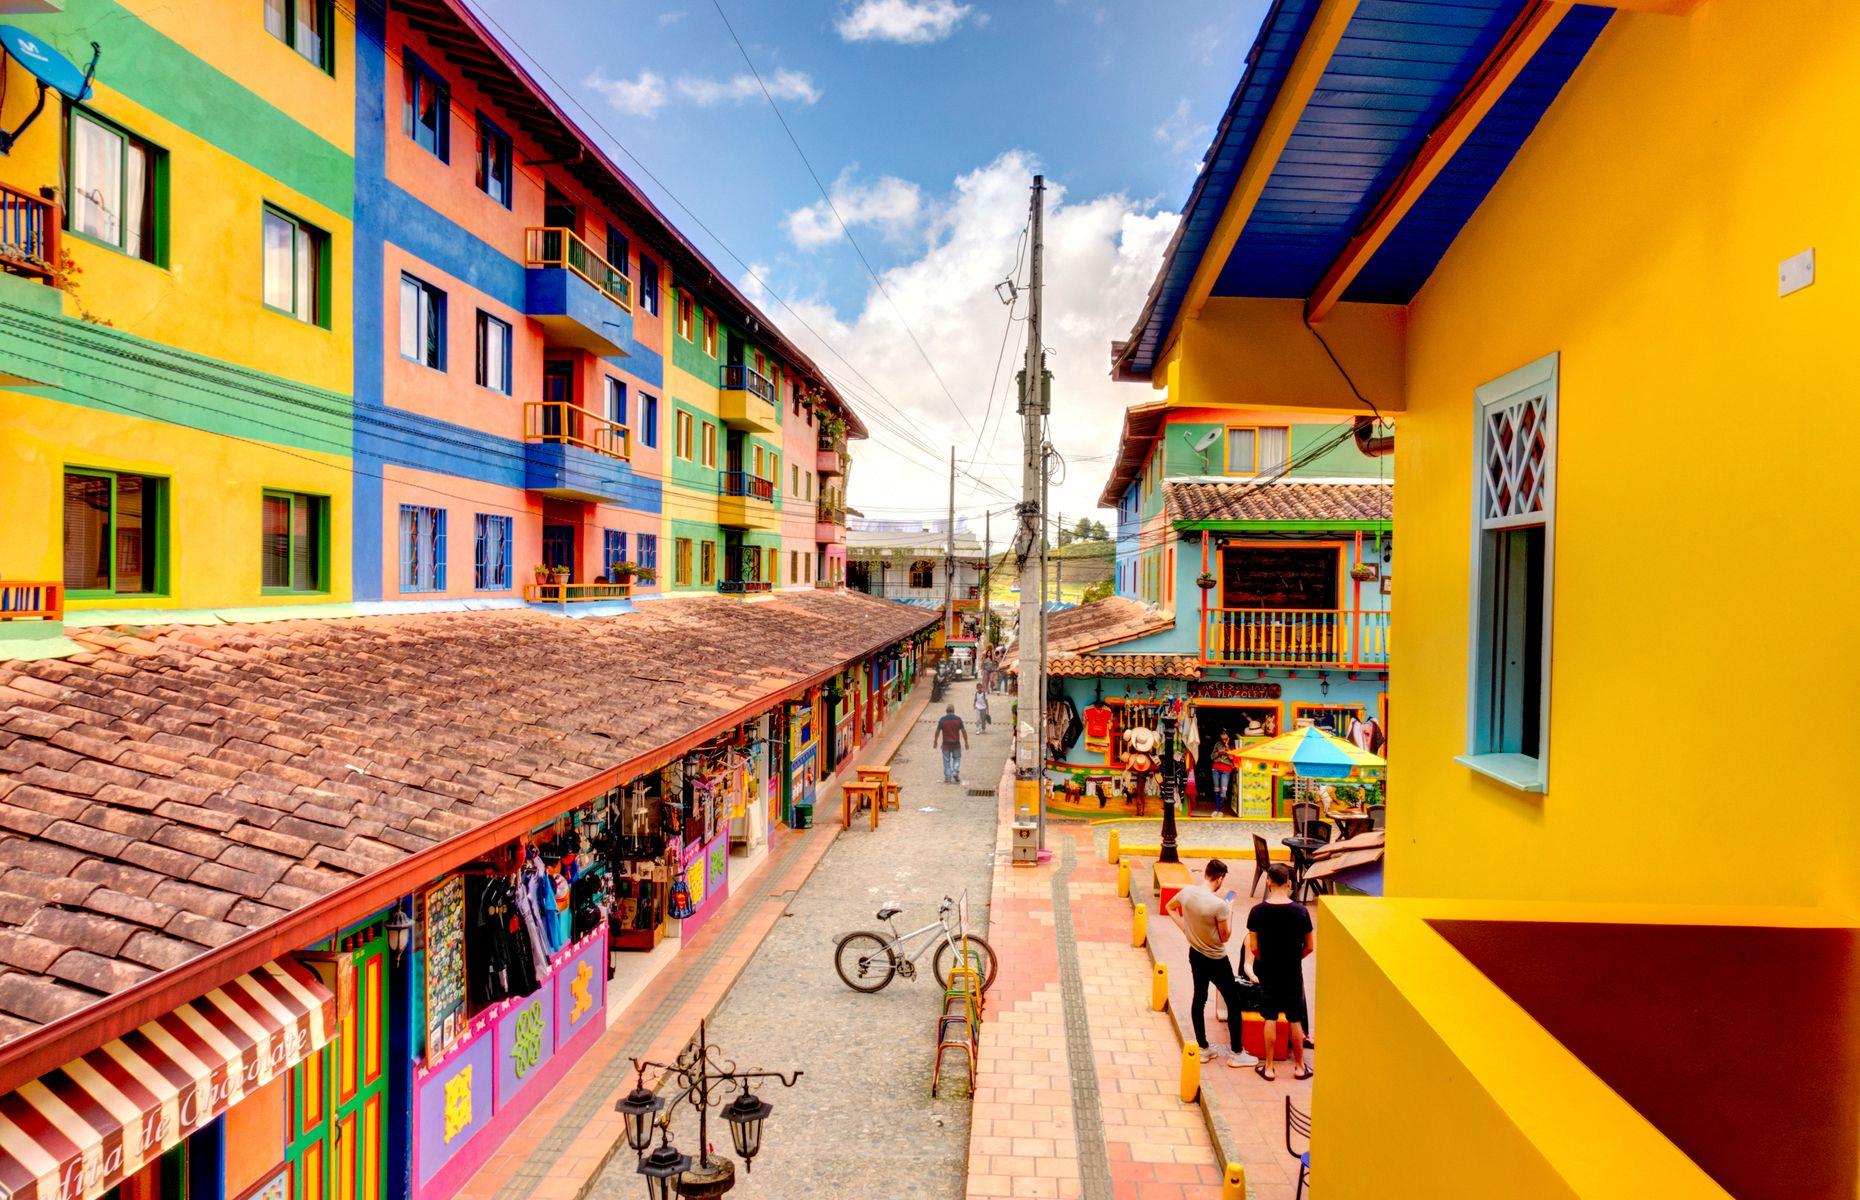 <p>Painted in a rainbow of vibrant hues, the Colombian town of Guatapé is as colorful as they come. The most iconic feature of this curious place are its zócalos – colorful panels that line the bottom of buildings – a tradition that started here around a century ago. Today, they are a vibrant depiction of village life, with some panels telling stories and others advertising local businesses.</p>  <p><strong><a href="https://www.loveexploring.com/galleries/49689/the-worlds-most-colourful-destinations?page=1">See more colorful destinations around the world</a></strong></p>